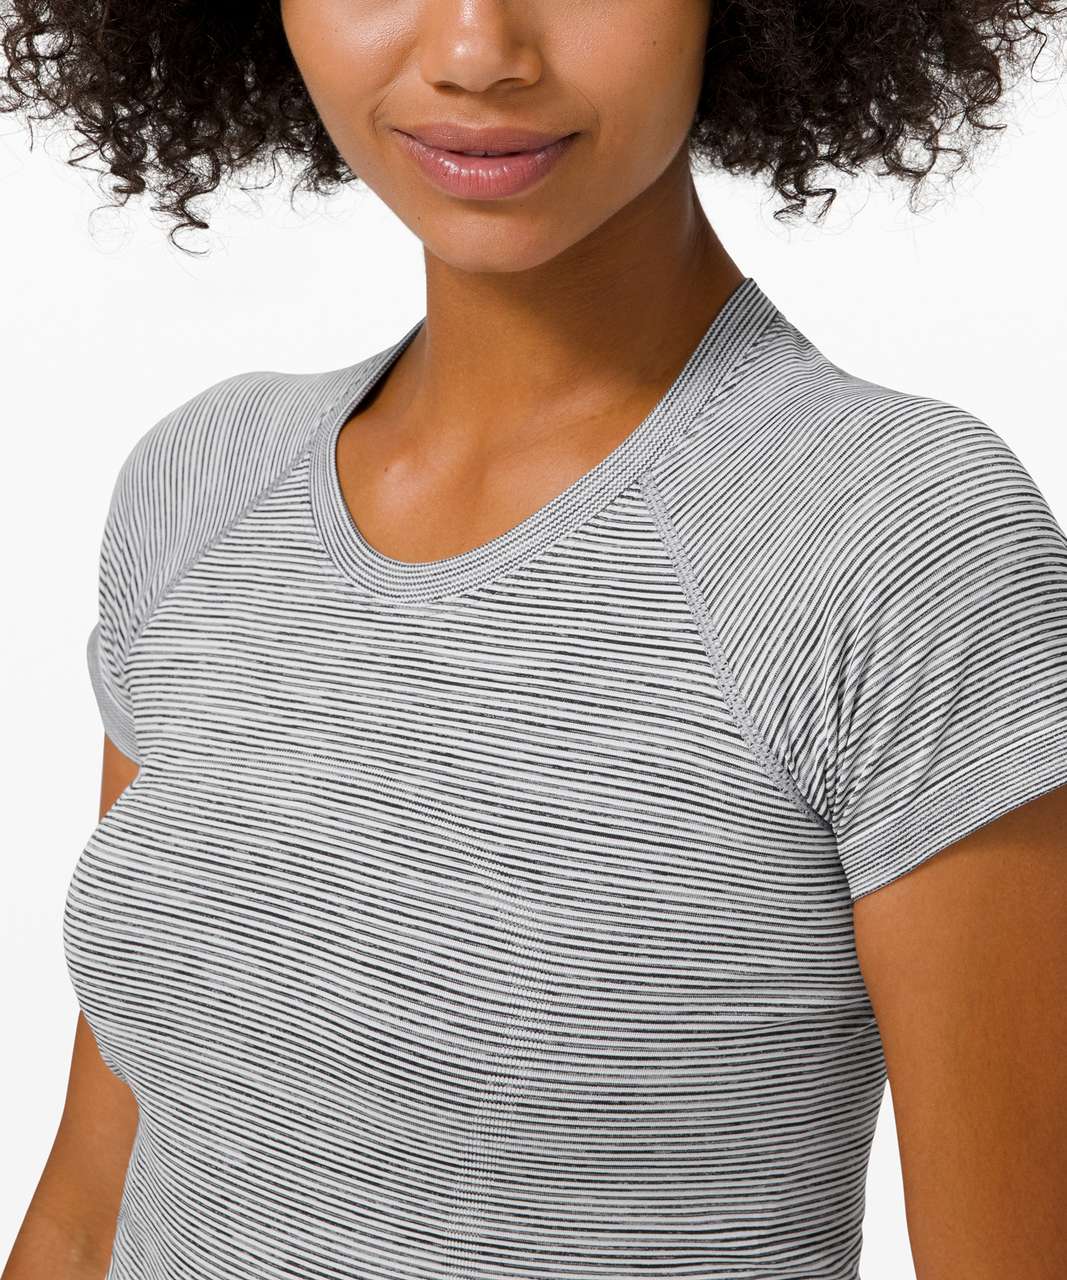 Lululemon Swiftly Tech Short Sleeve 2.0 - Wee Are From Space White